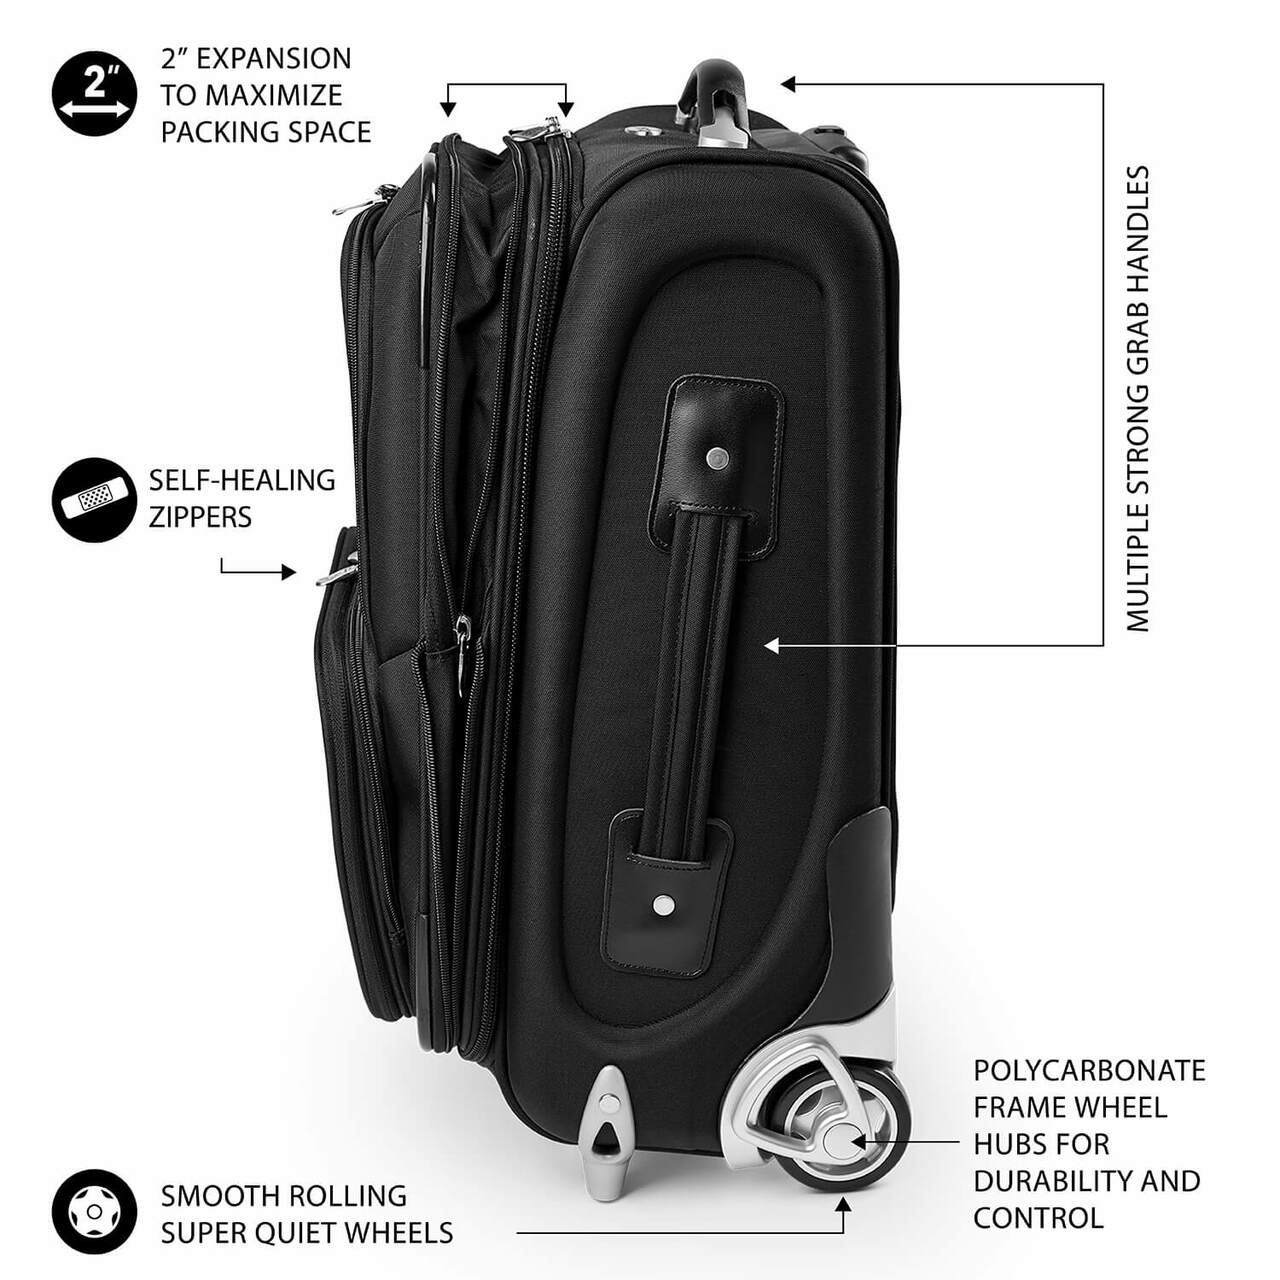 Rockies Carry On Luggage | Colorado Rockies Rolling Carry On Luggage